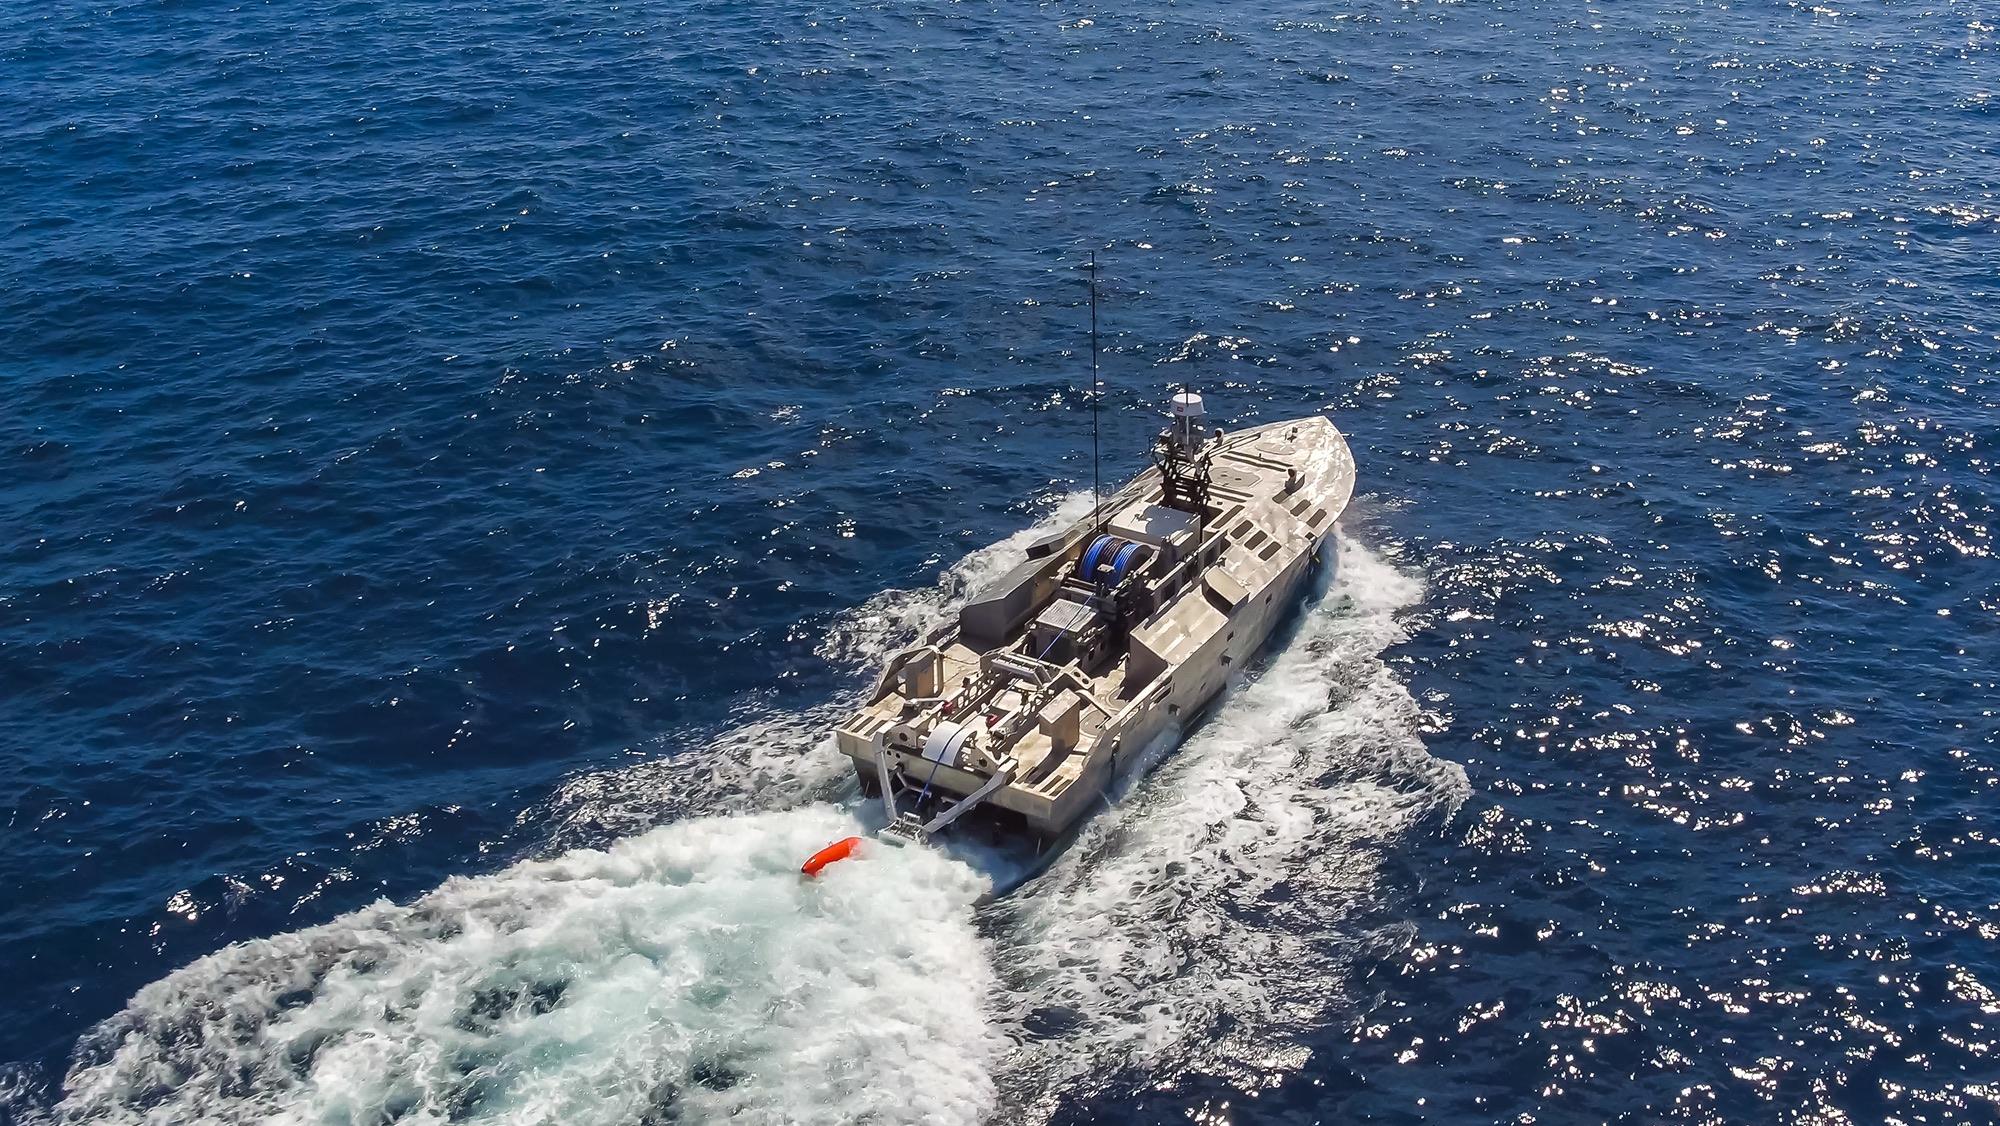 ‘Controlled’ report paints rough picture for Navy’s unmanned mine-clearing vessel